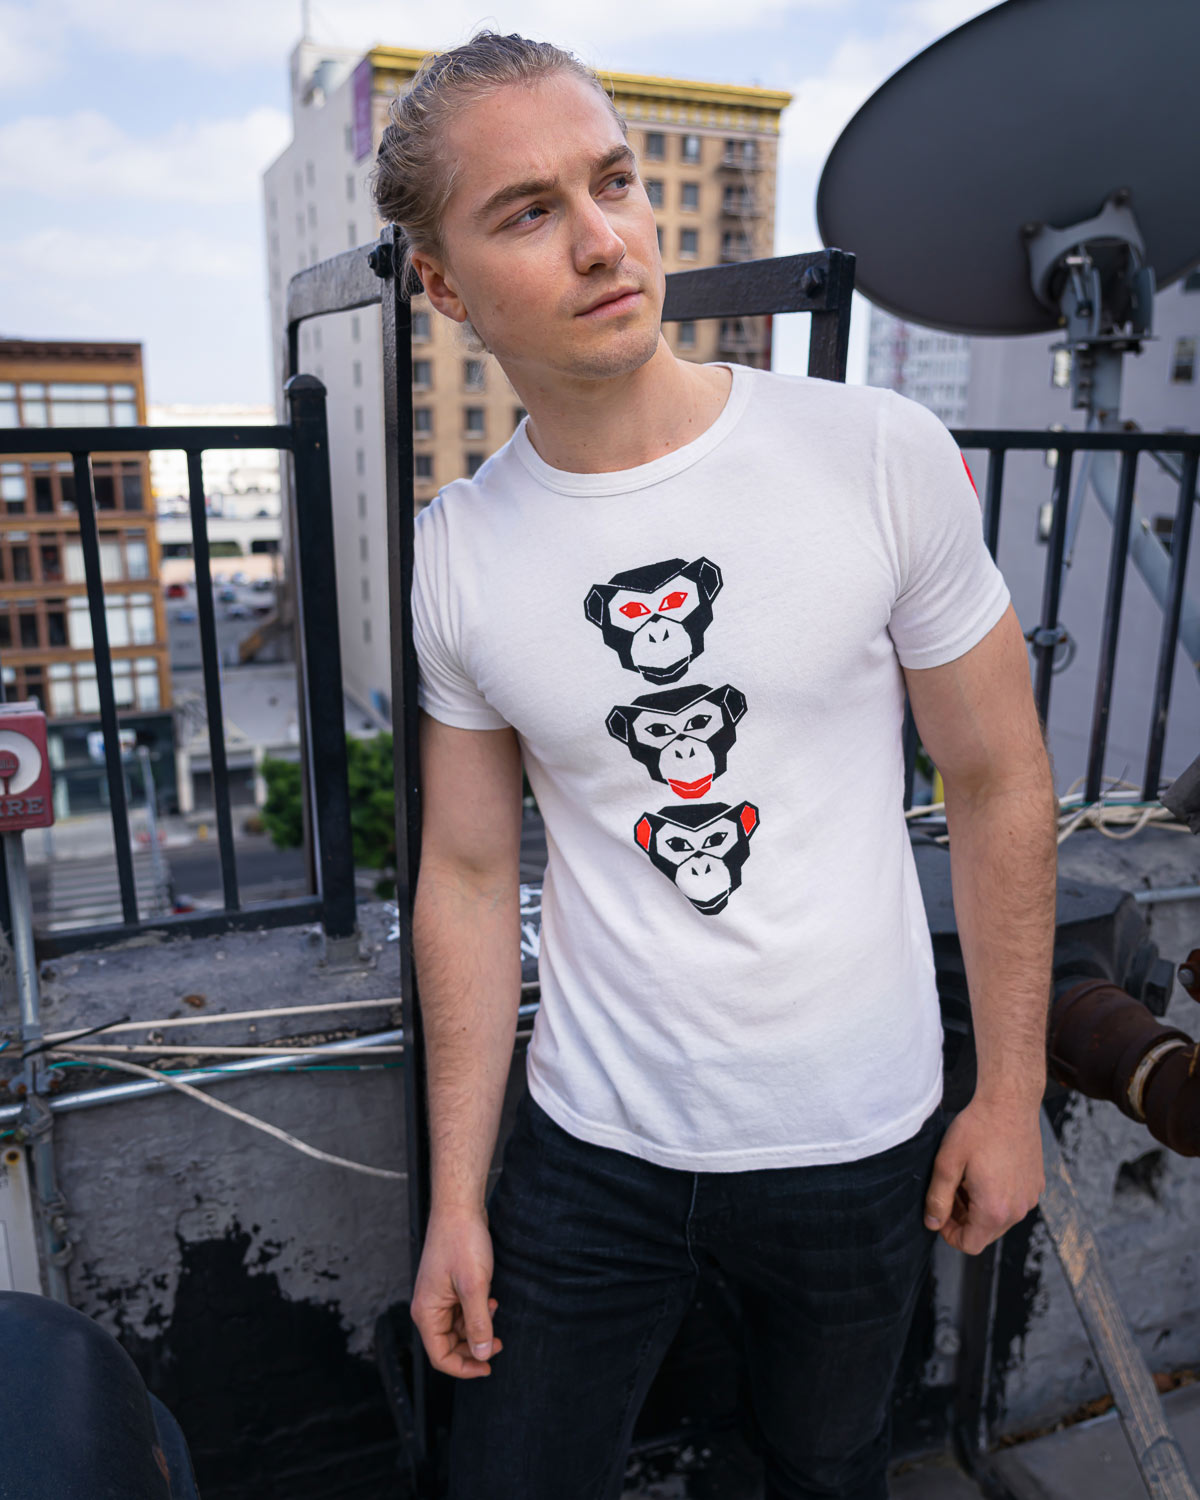 Model wearing Vintage white see evil t-shirt on rooftop